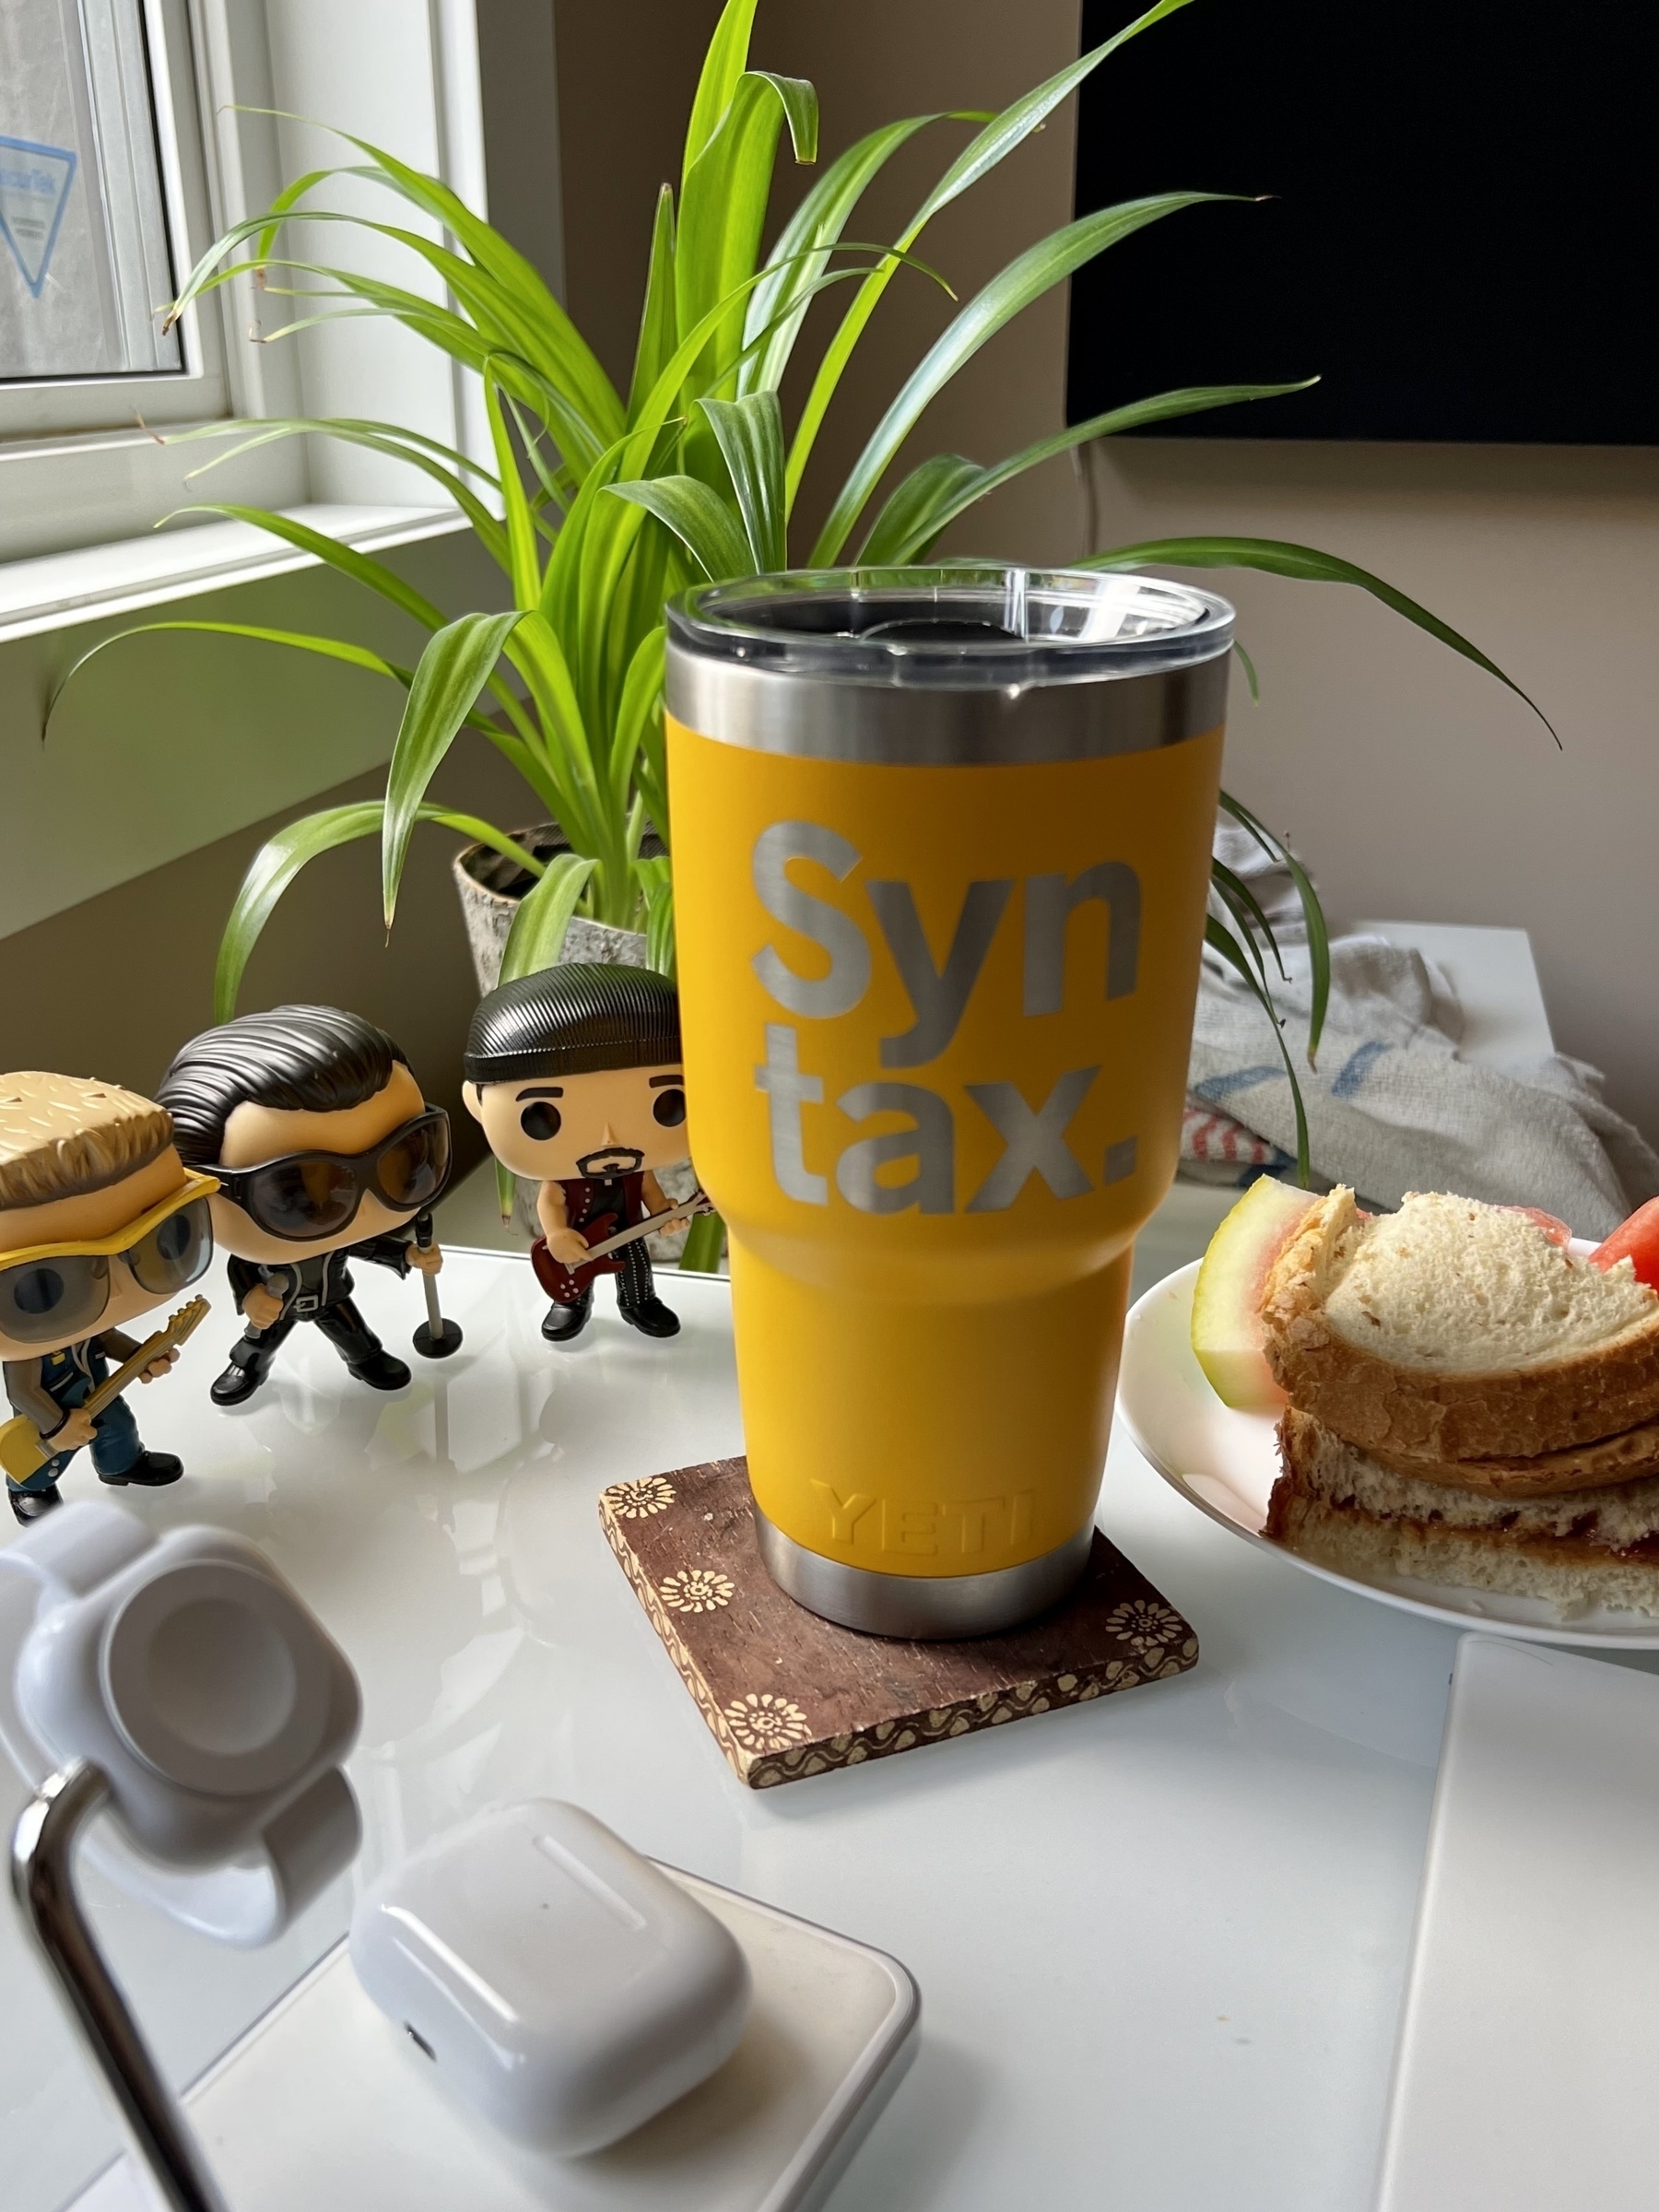 Yeti mug with Syntax.fm branding with U2 funkopop characters, a plant, and a sandwich beside it. 